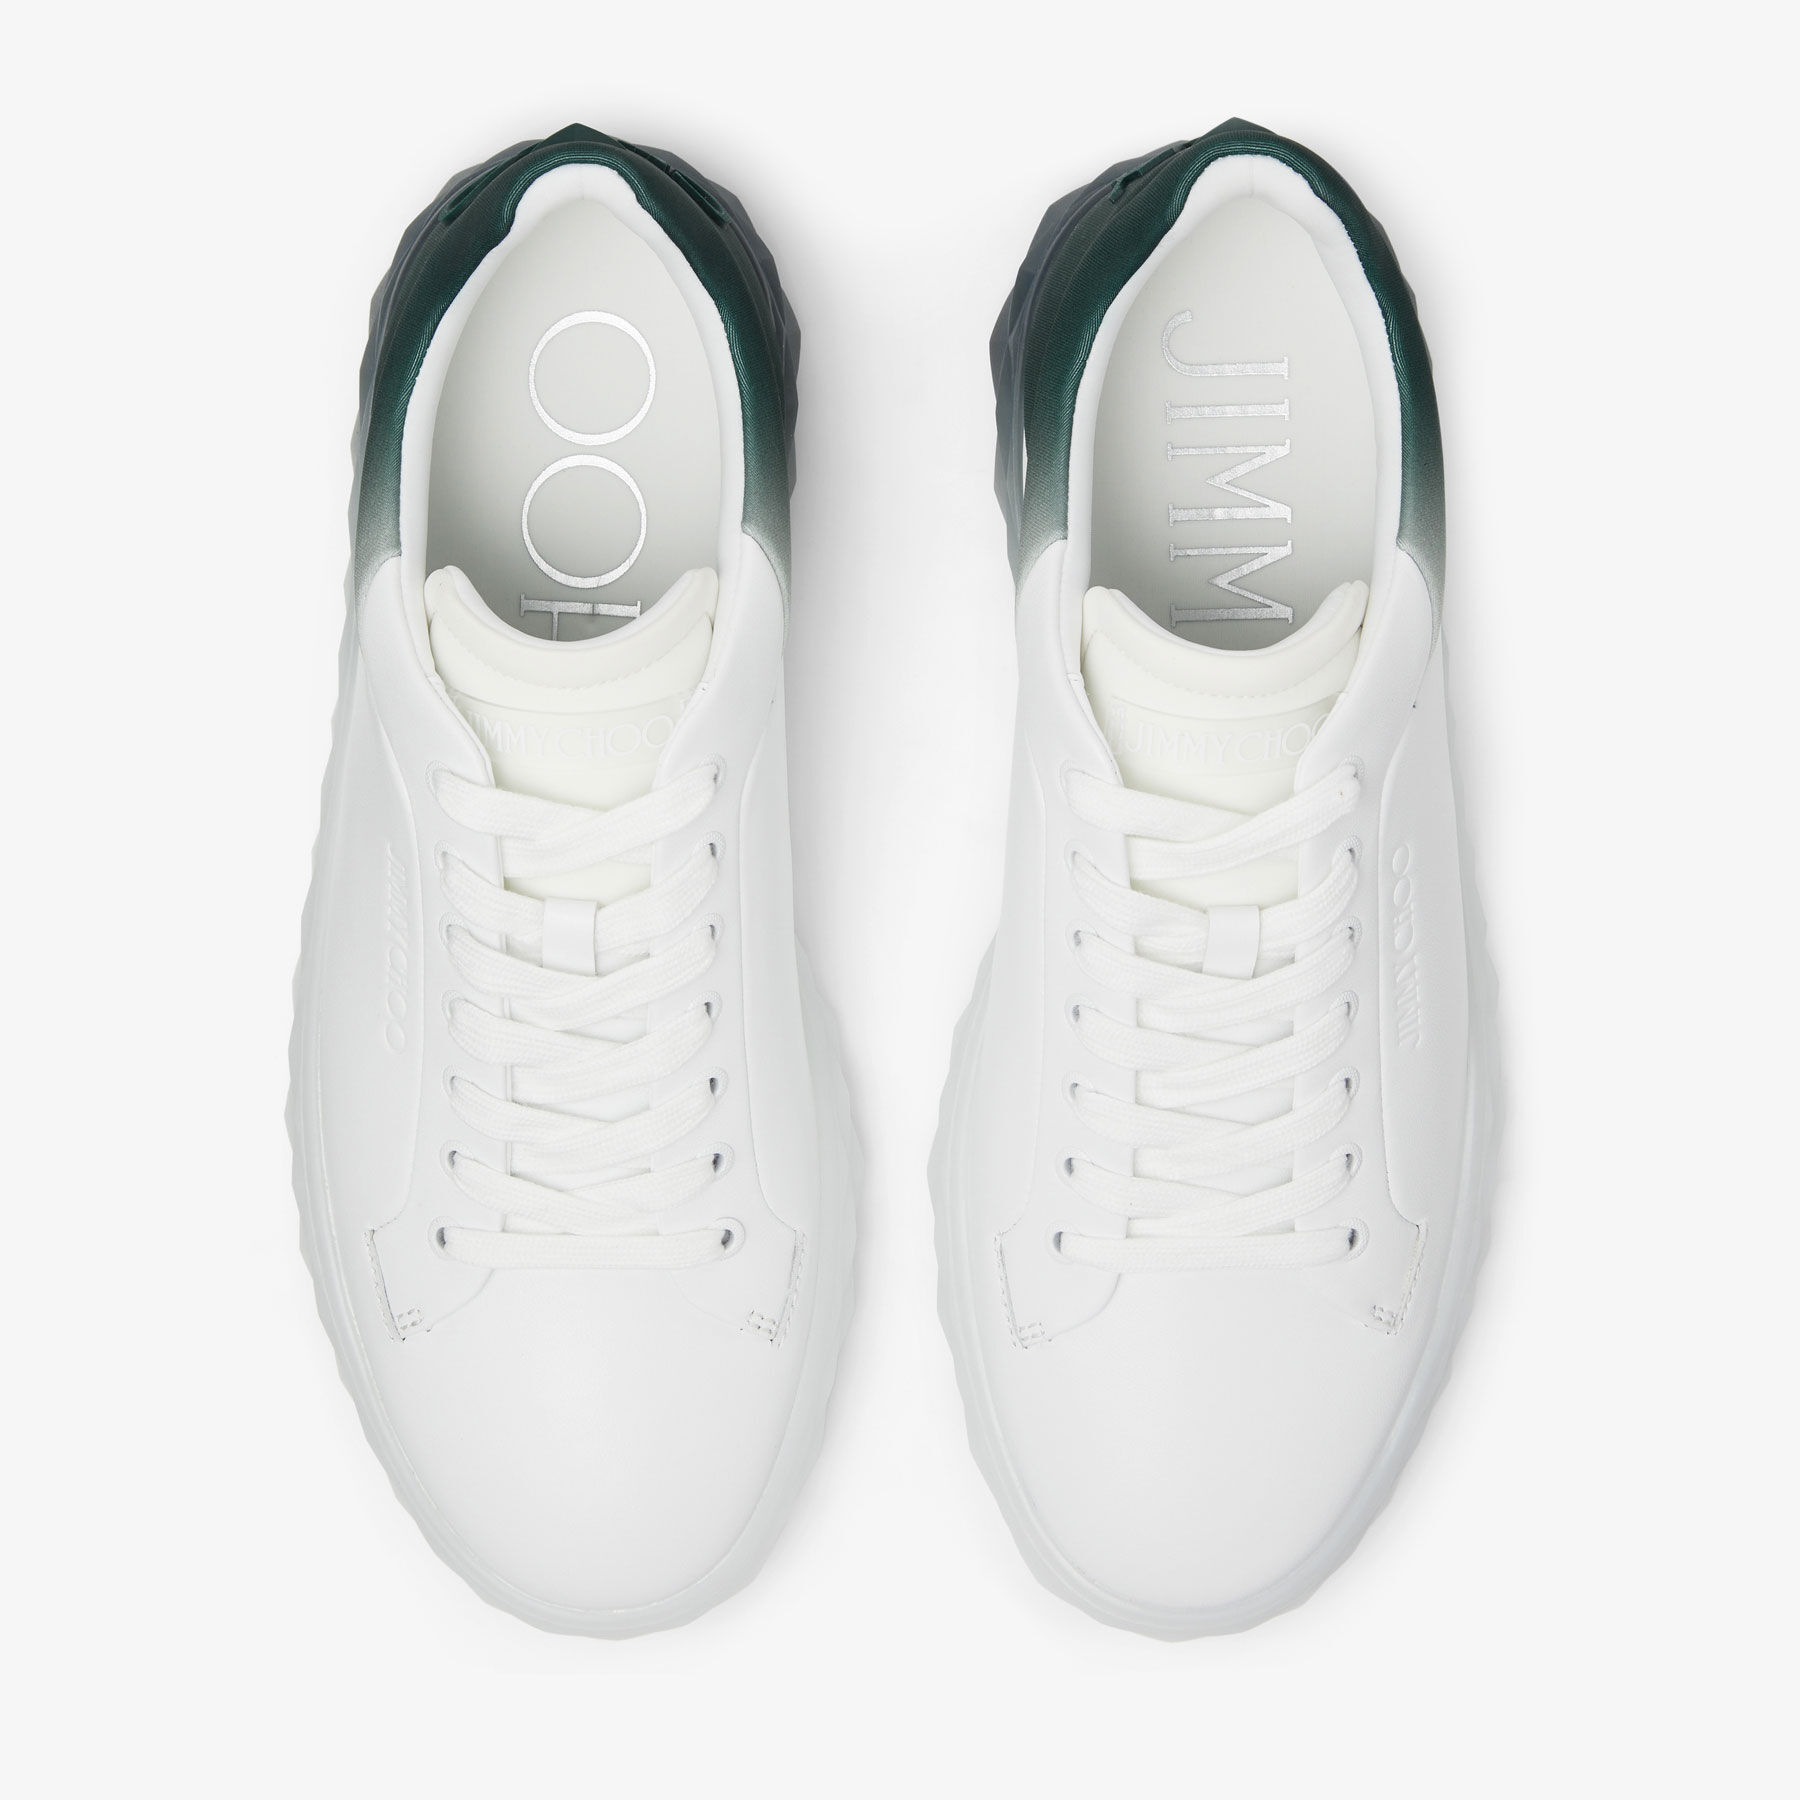 Diamond Light/M Ii | White and Dark Green Leather Mix Low-Top 